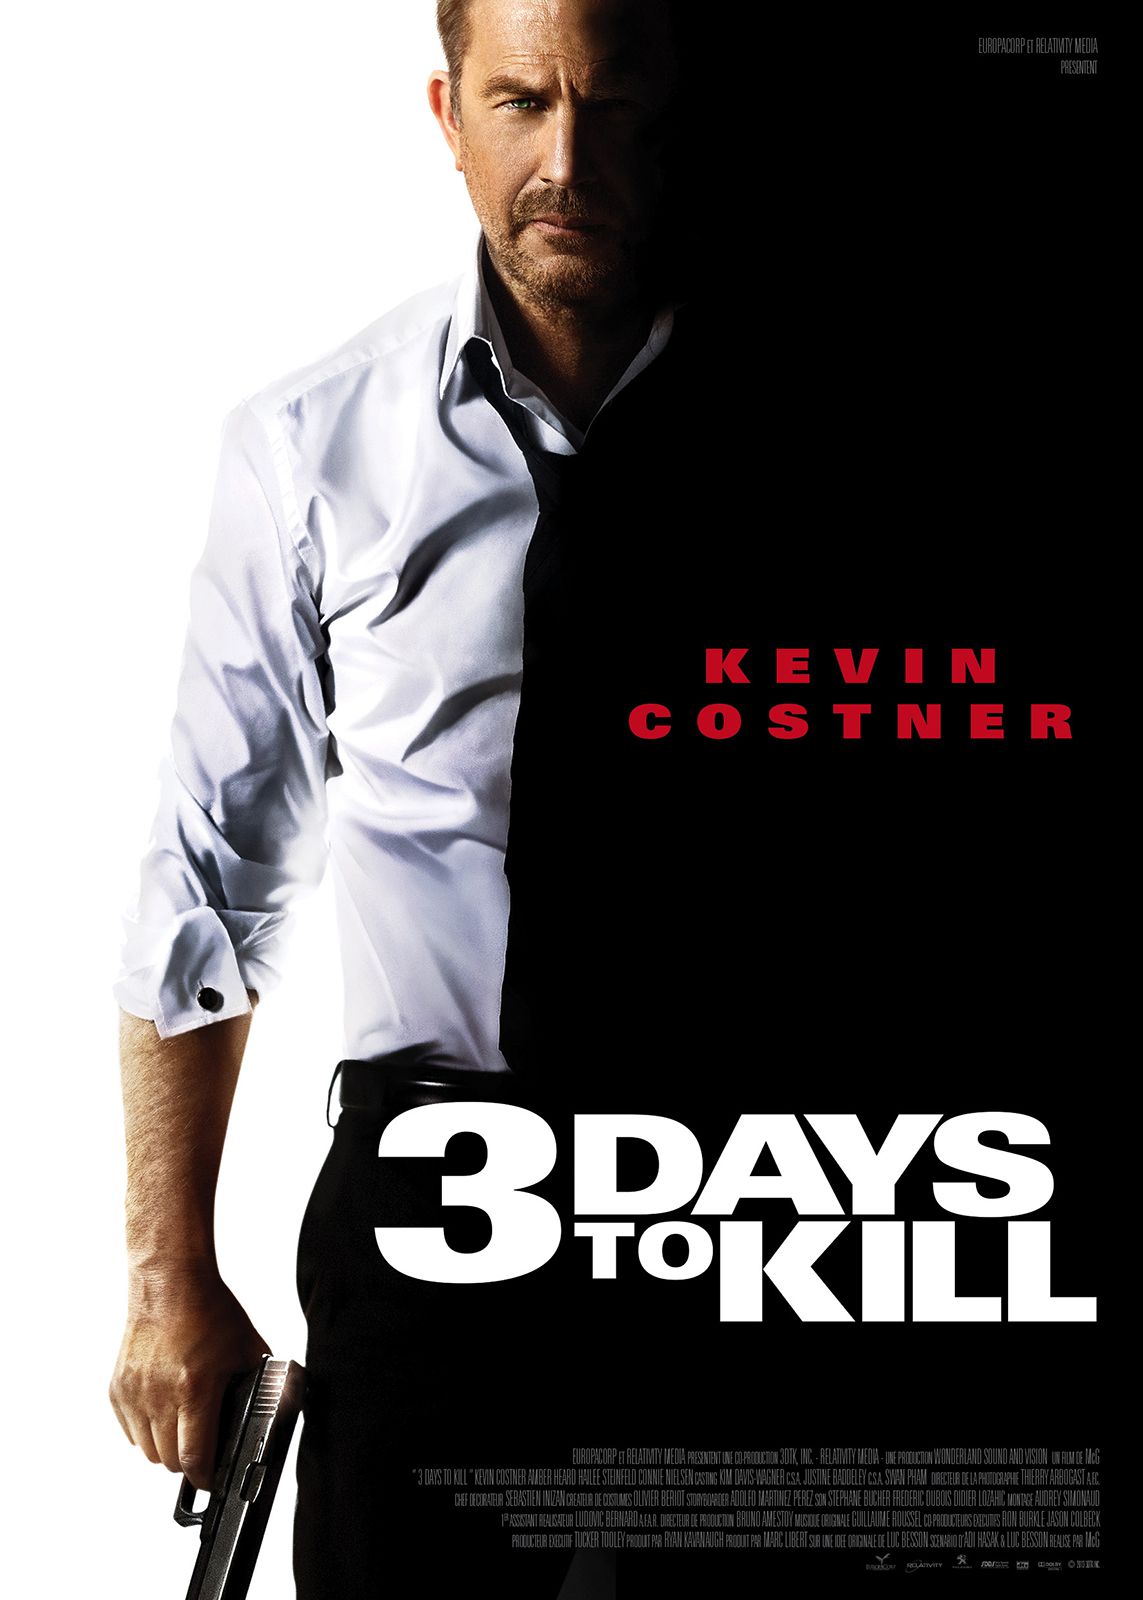 3 Days to Kill - Film (2014) streaming VF gratuit complet